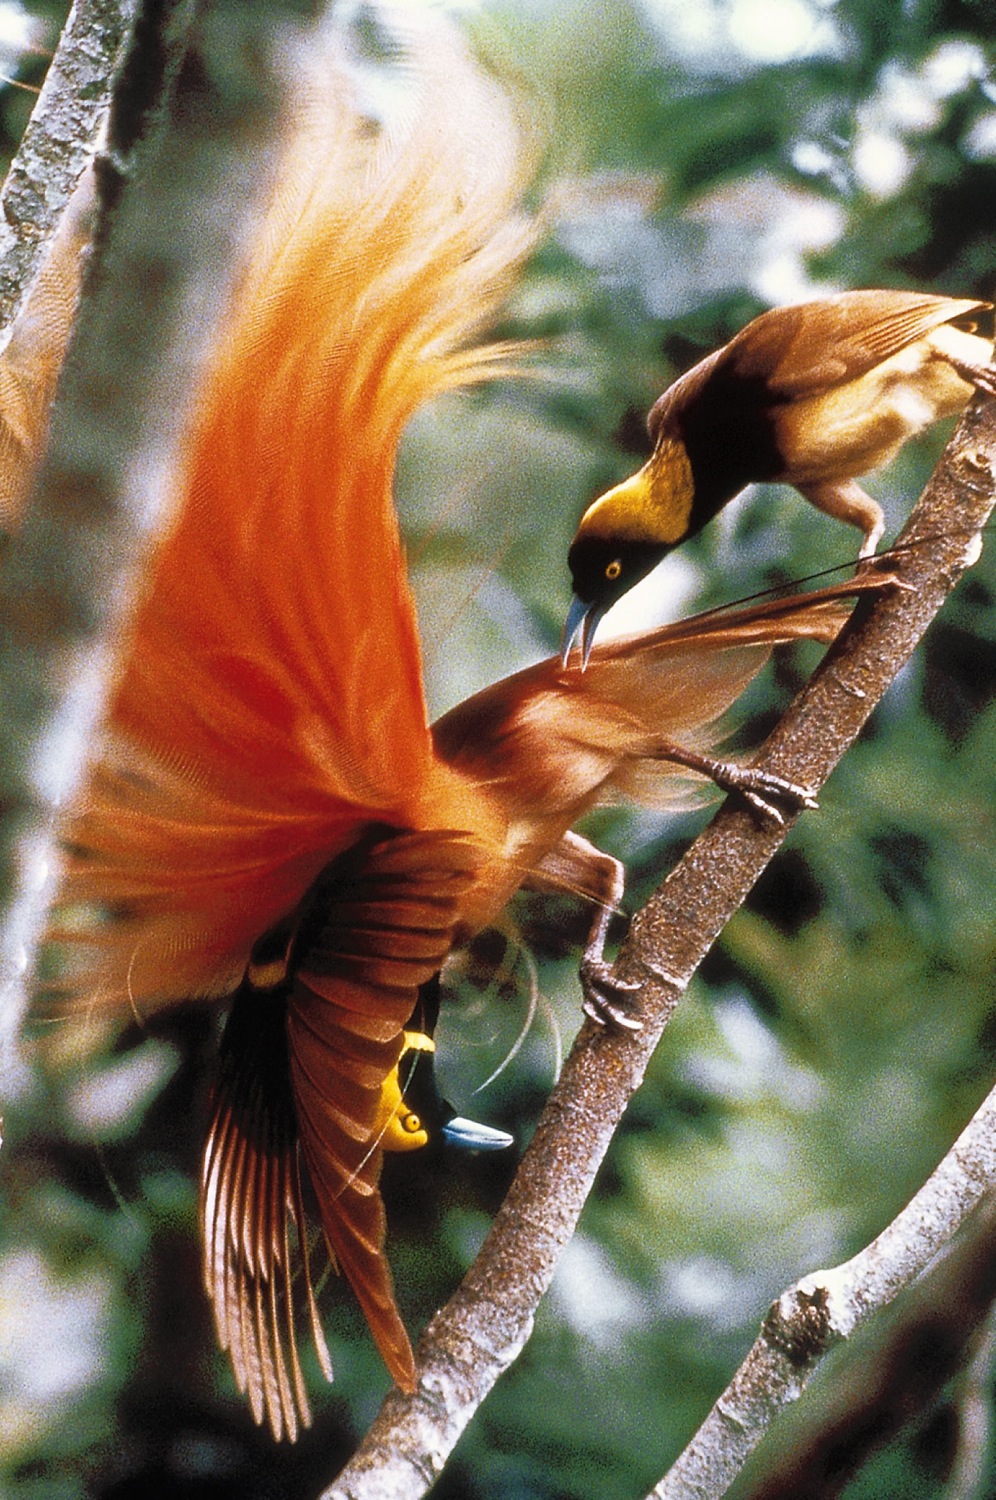 Sexual Selection: Birds of Paradise